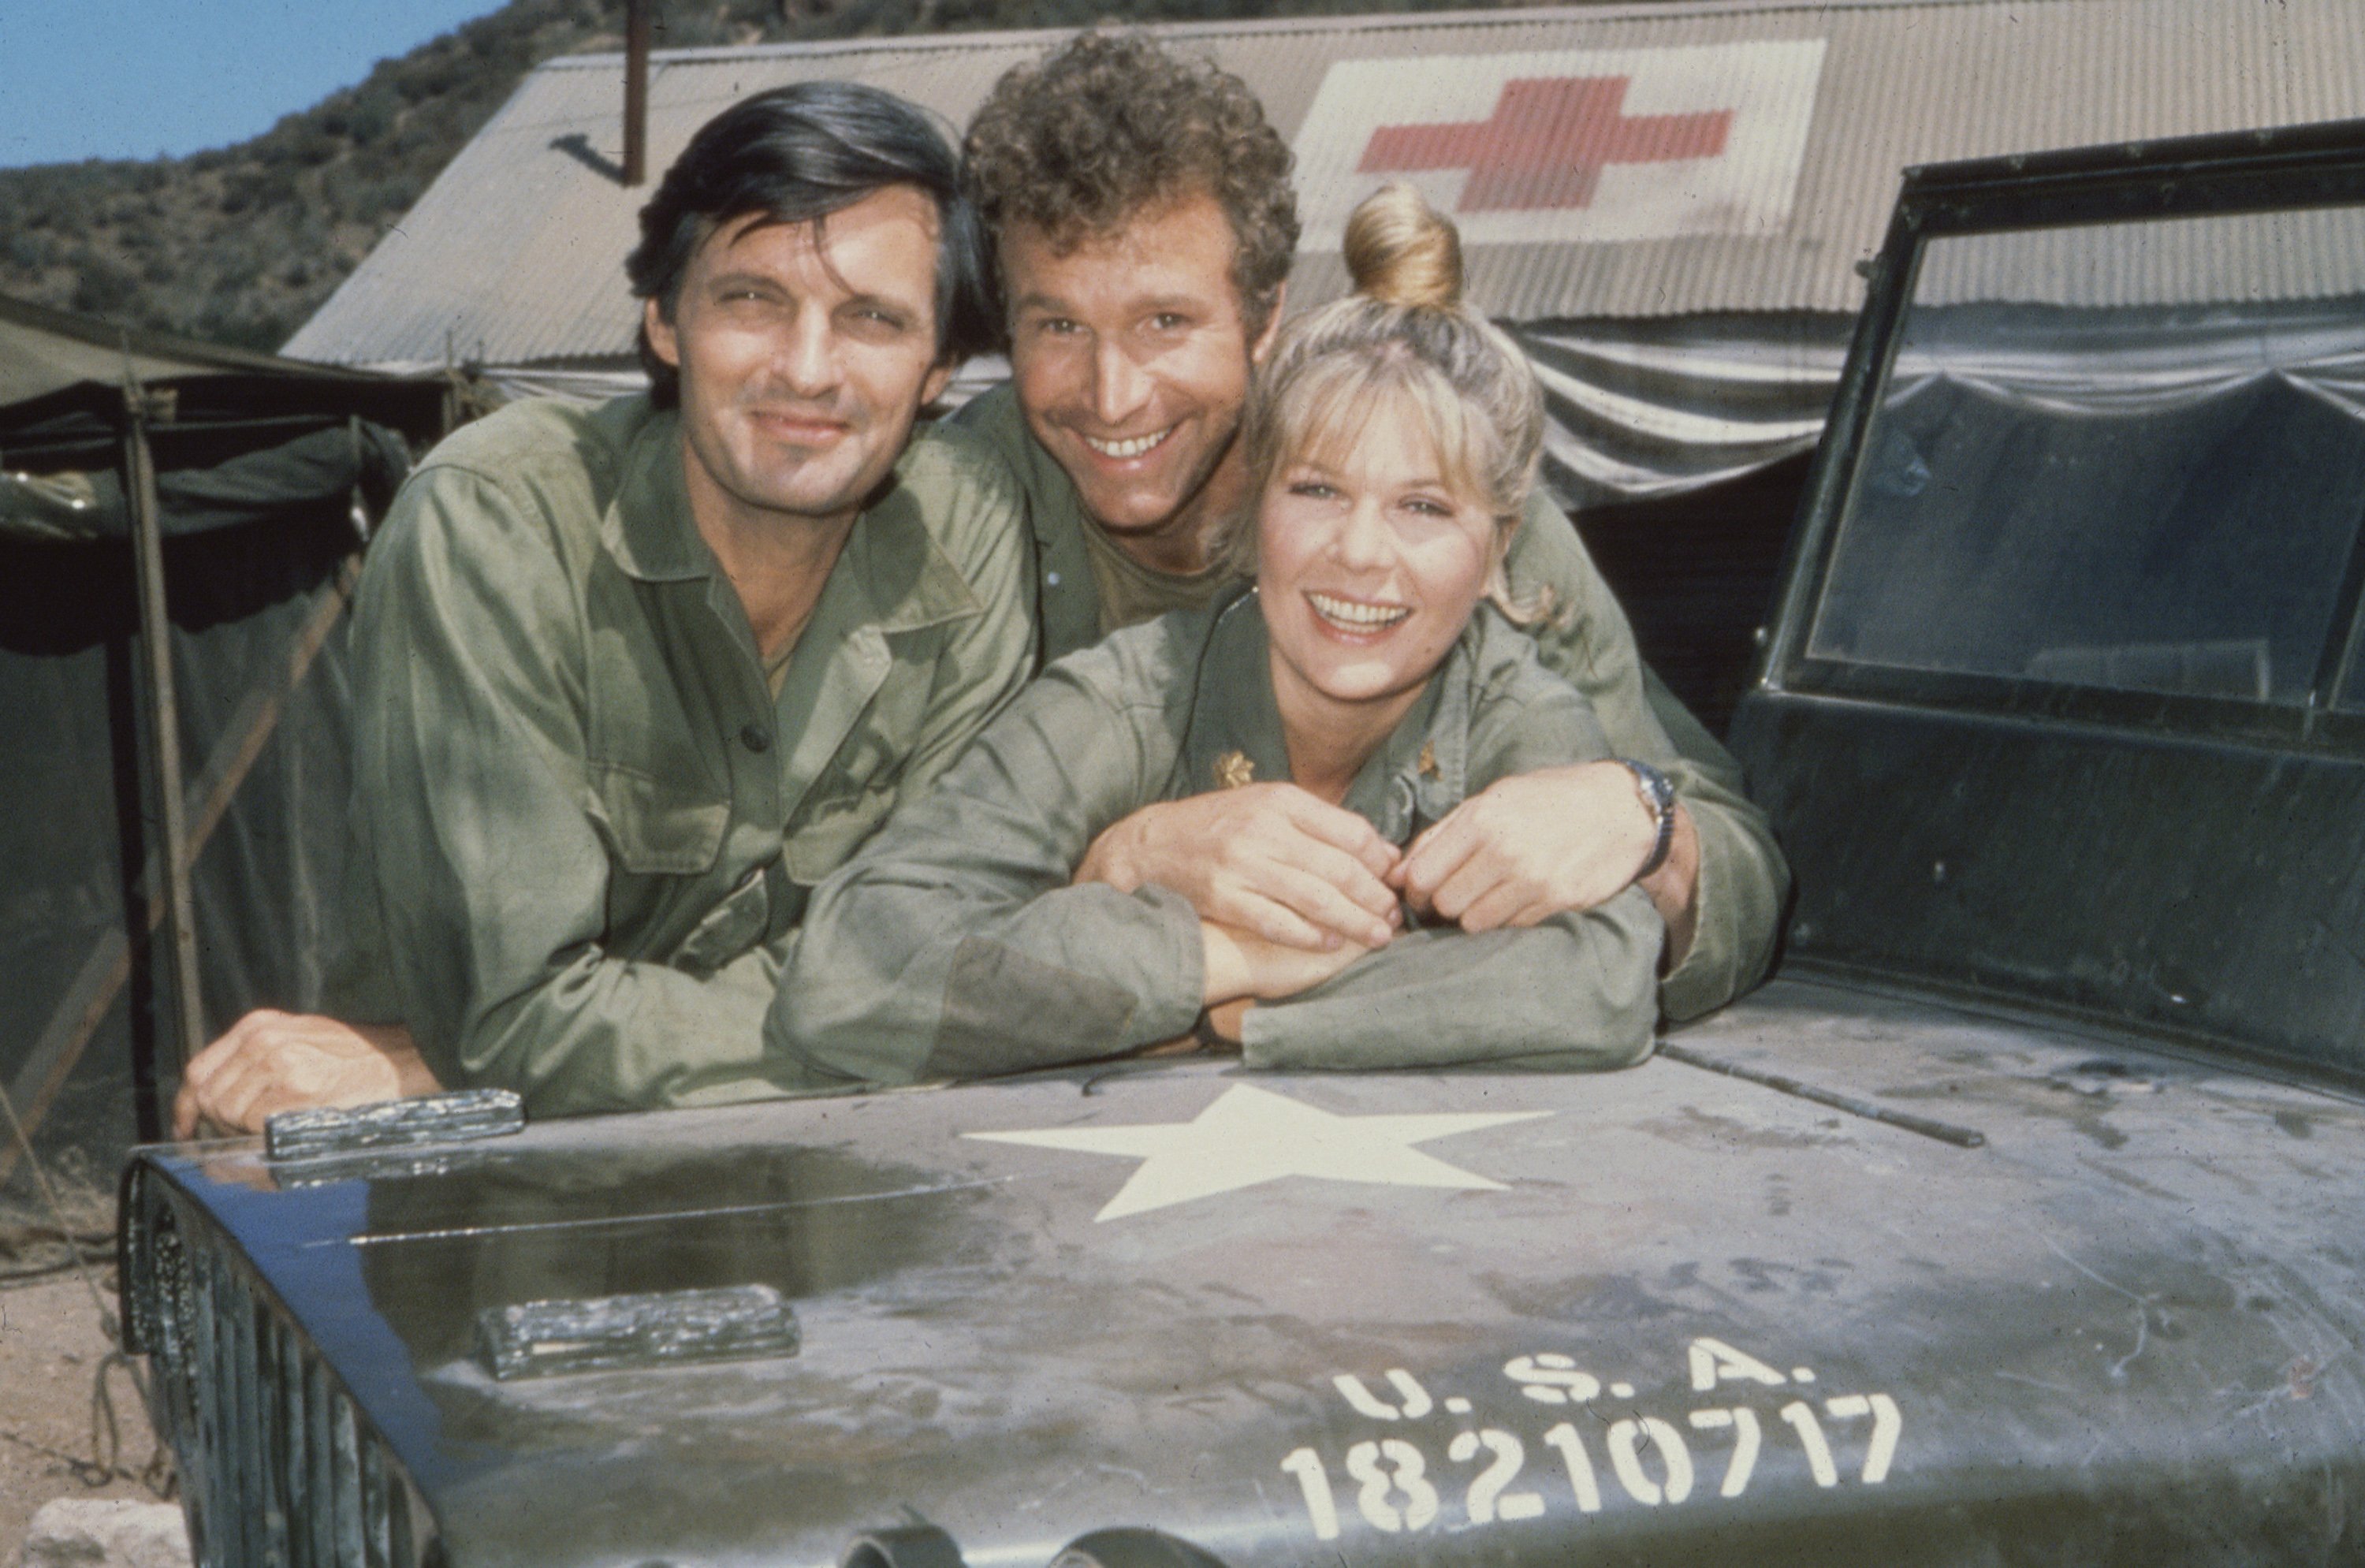 Left to right: Actors Alan Alda, Wayne Rogers, and Loretta Swit in 1972 on the set of the long-running CBS comedy-drama 'M*A*S*H'.